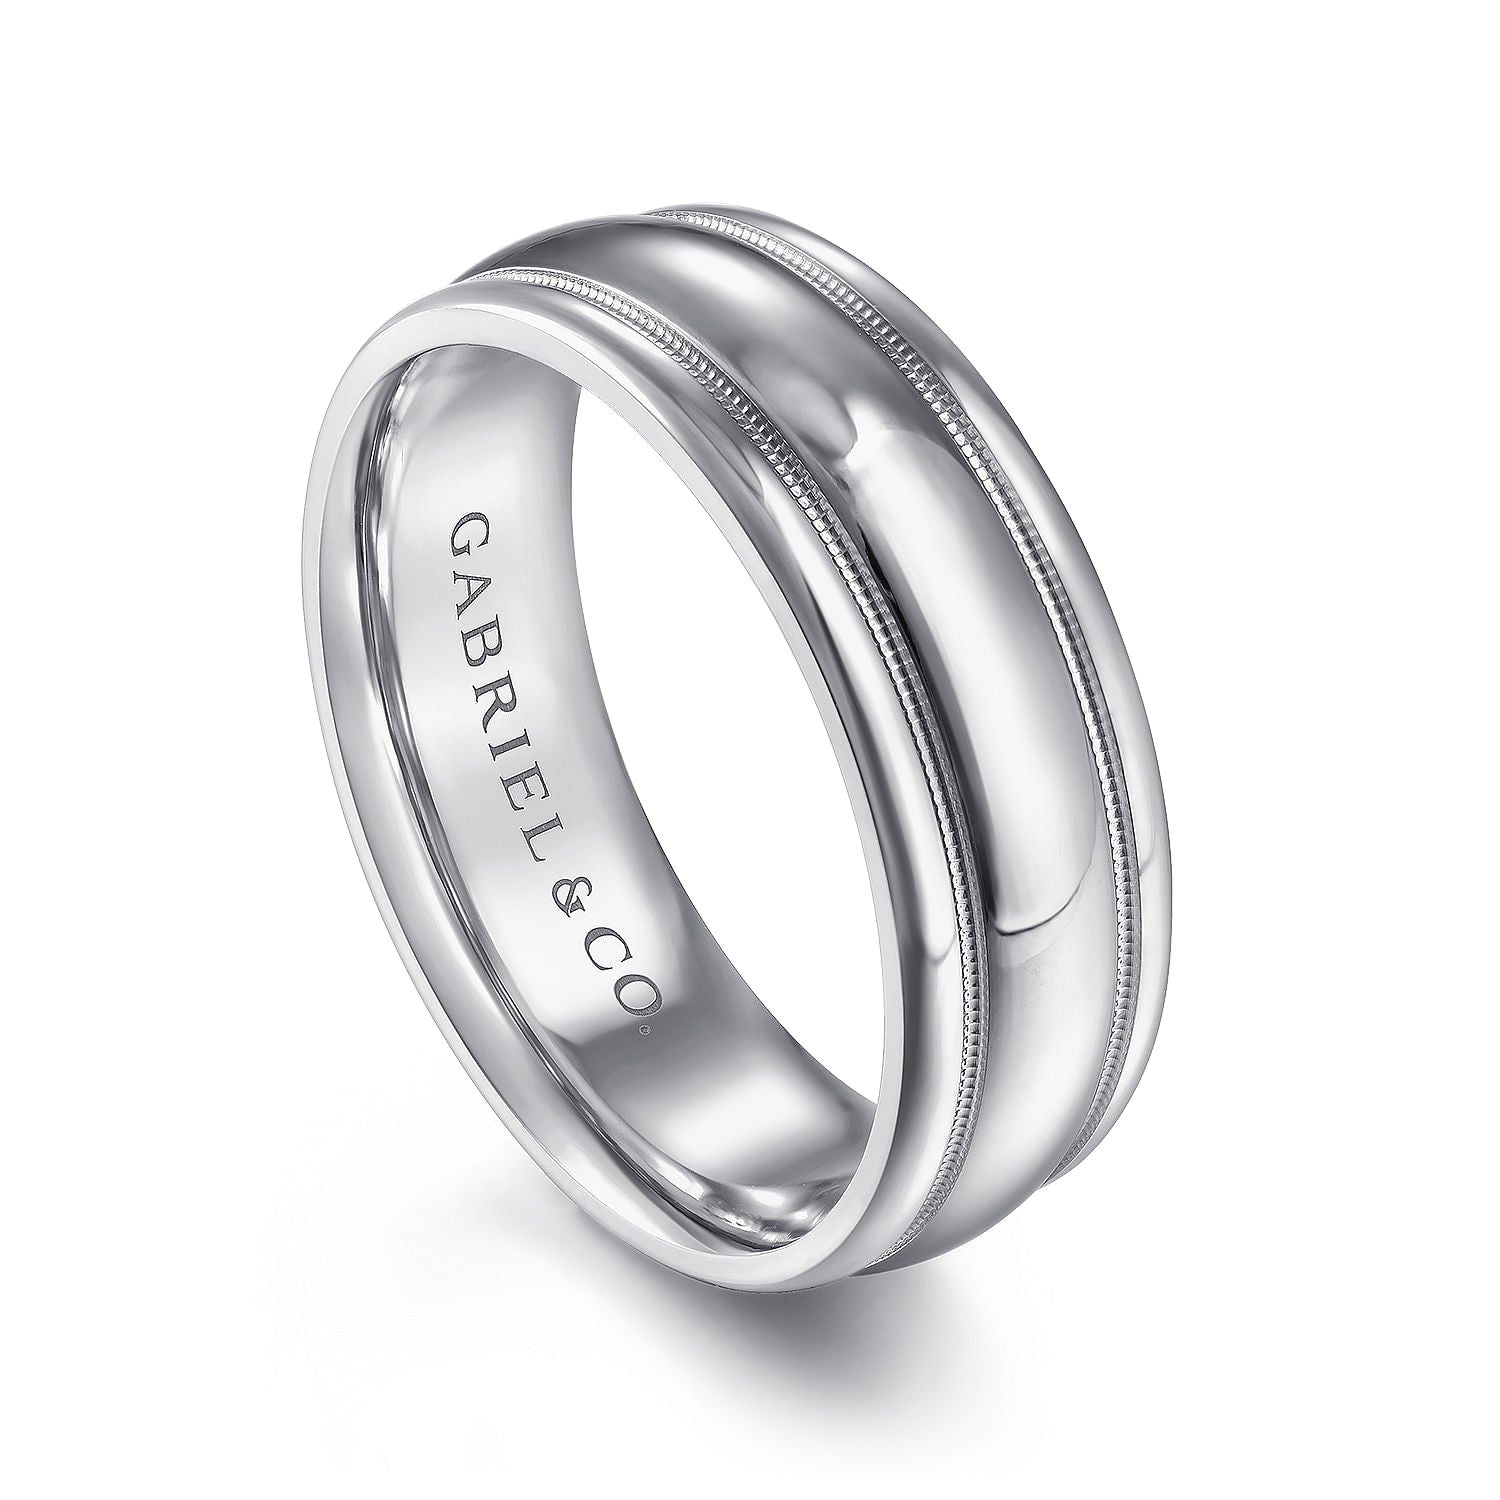 Gabriel & Co White Gold Wedding Band With A Raised Center And Milgrain Accents - Gold Wedding Bands - Men's